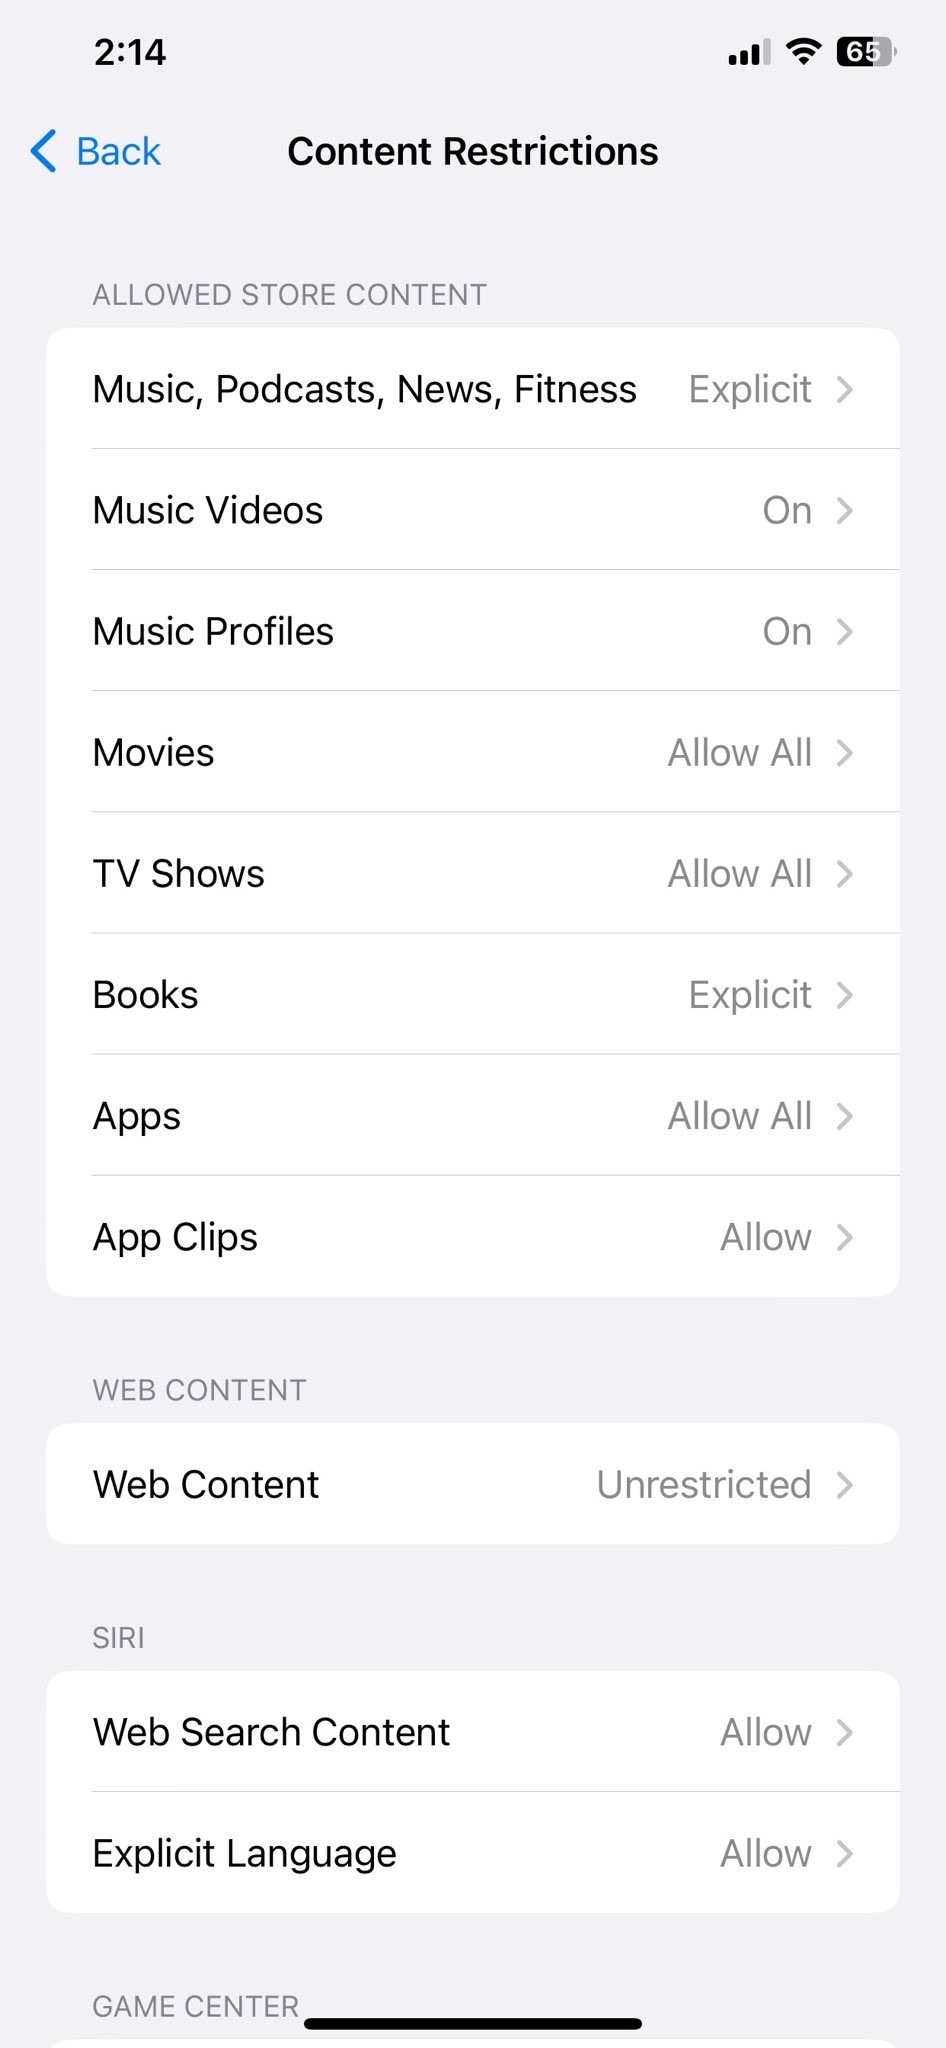 To block music with explicit lyrics, enable 'Music with Explicit Lyrics